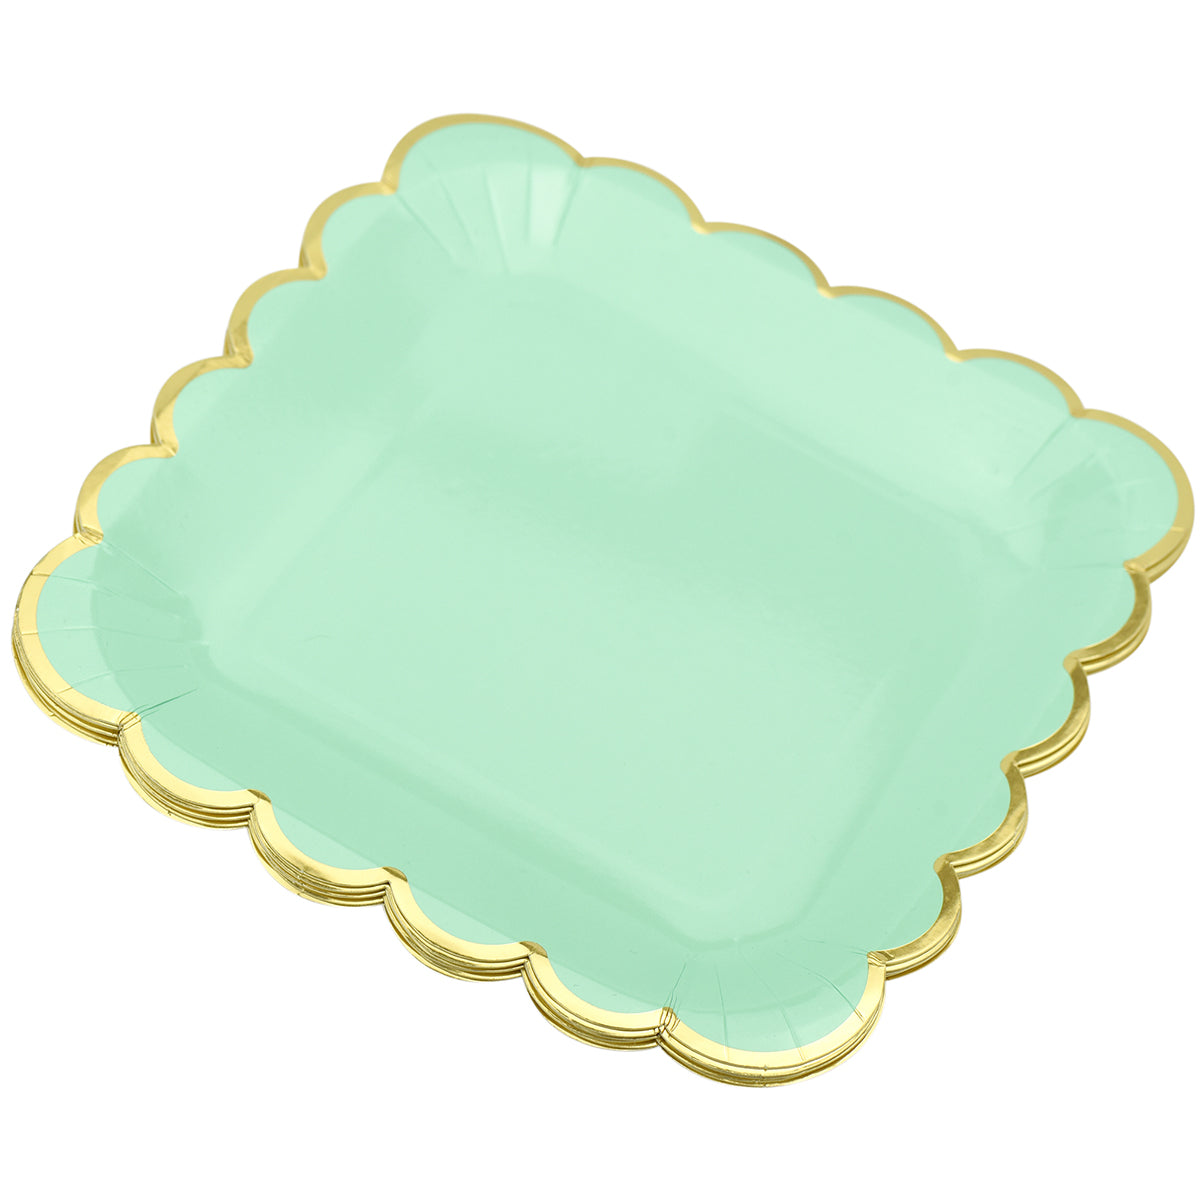 24 stacked gold wavy edge mint green square paper plates display in a white background 